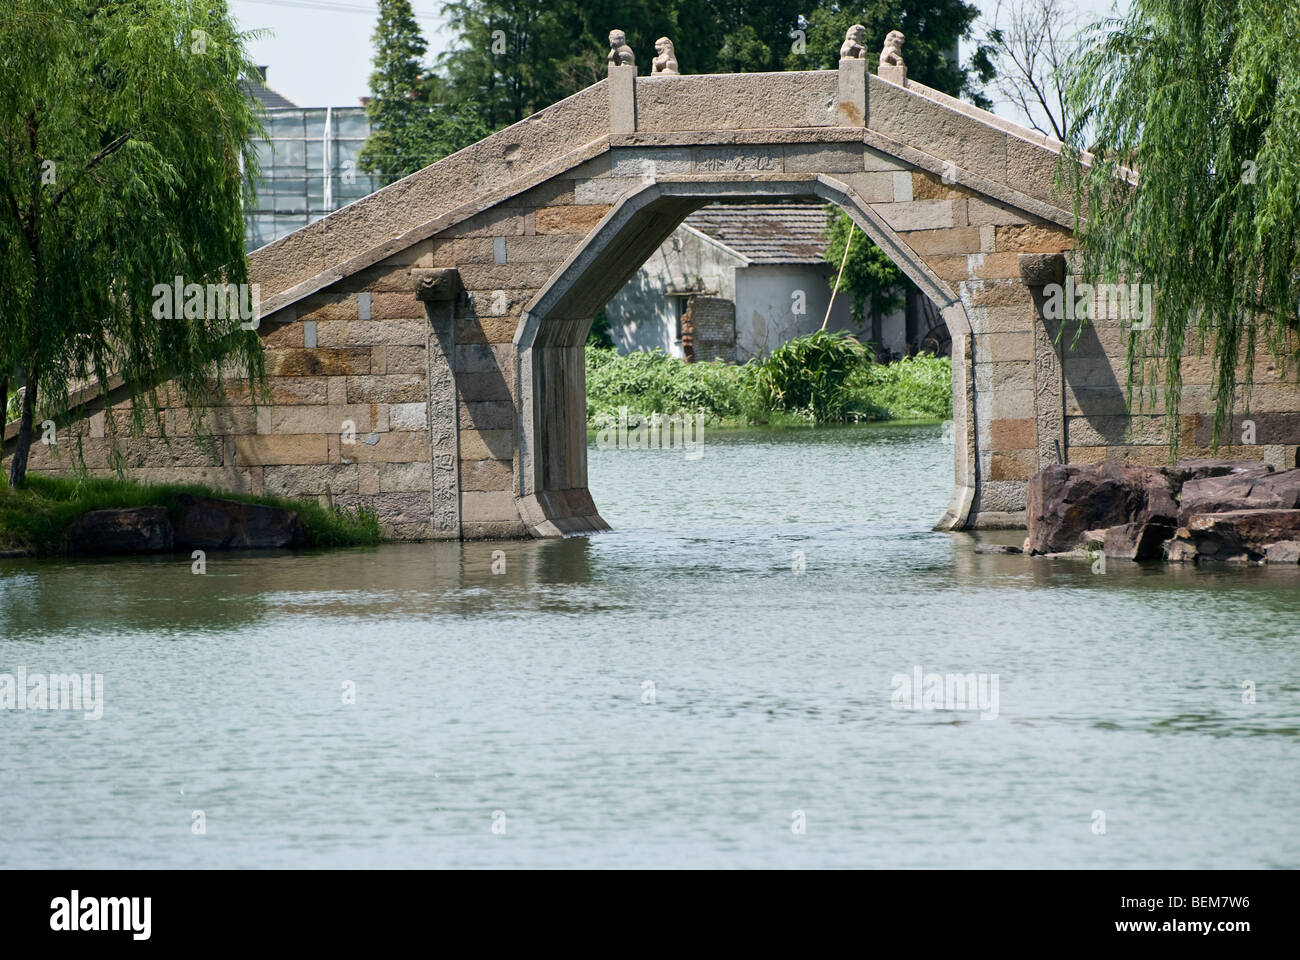 Ancient stone bridge with two willows Xitang is an ancient scenic town in Jiashan County, Zhejiang Province, China. Stock Photo